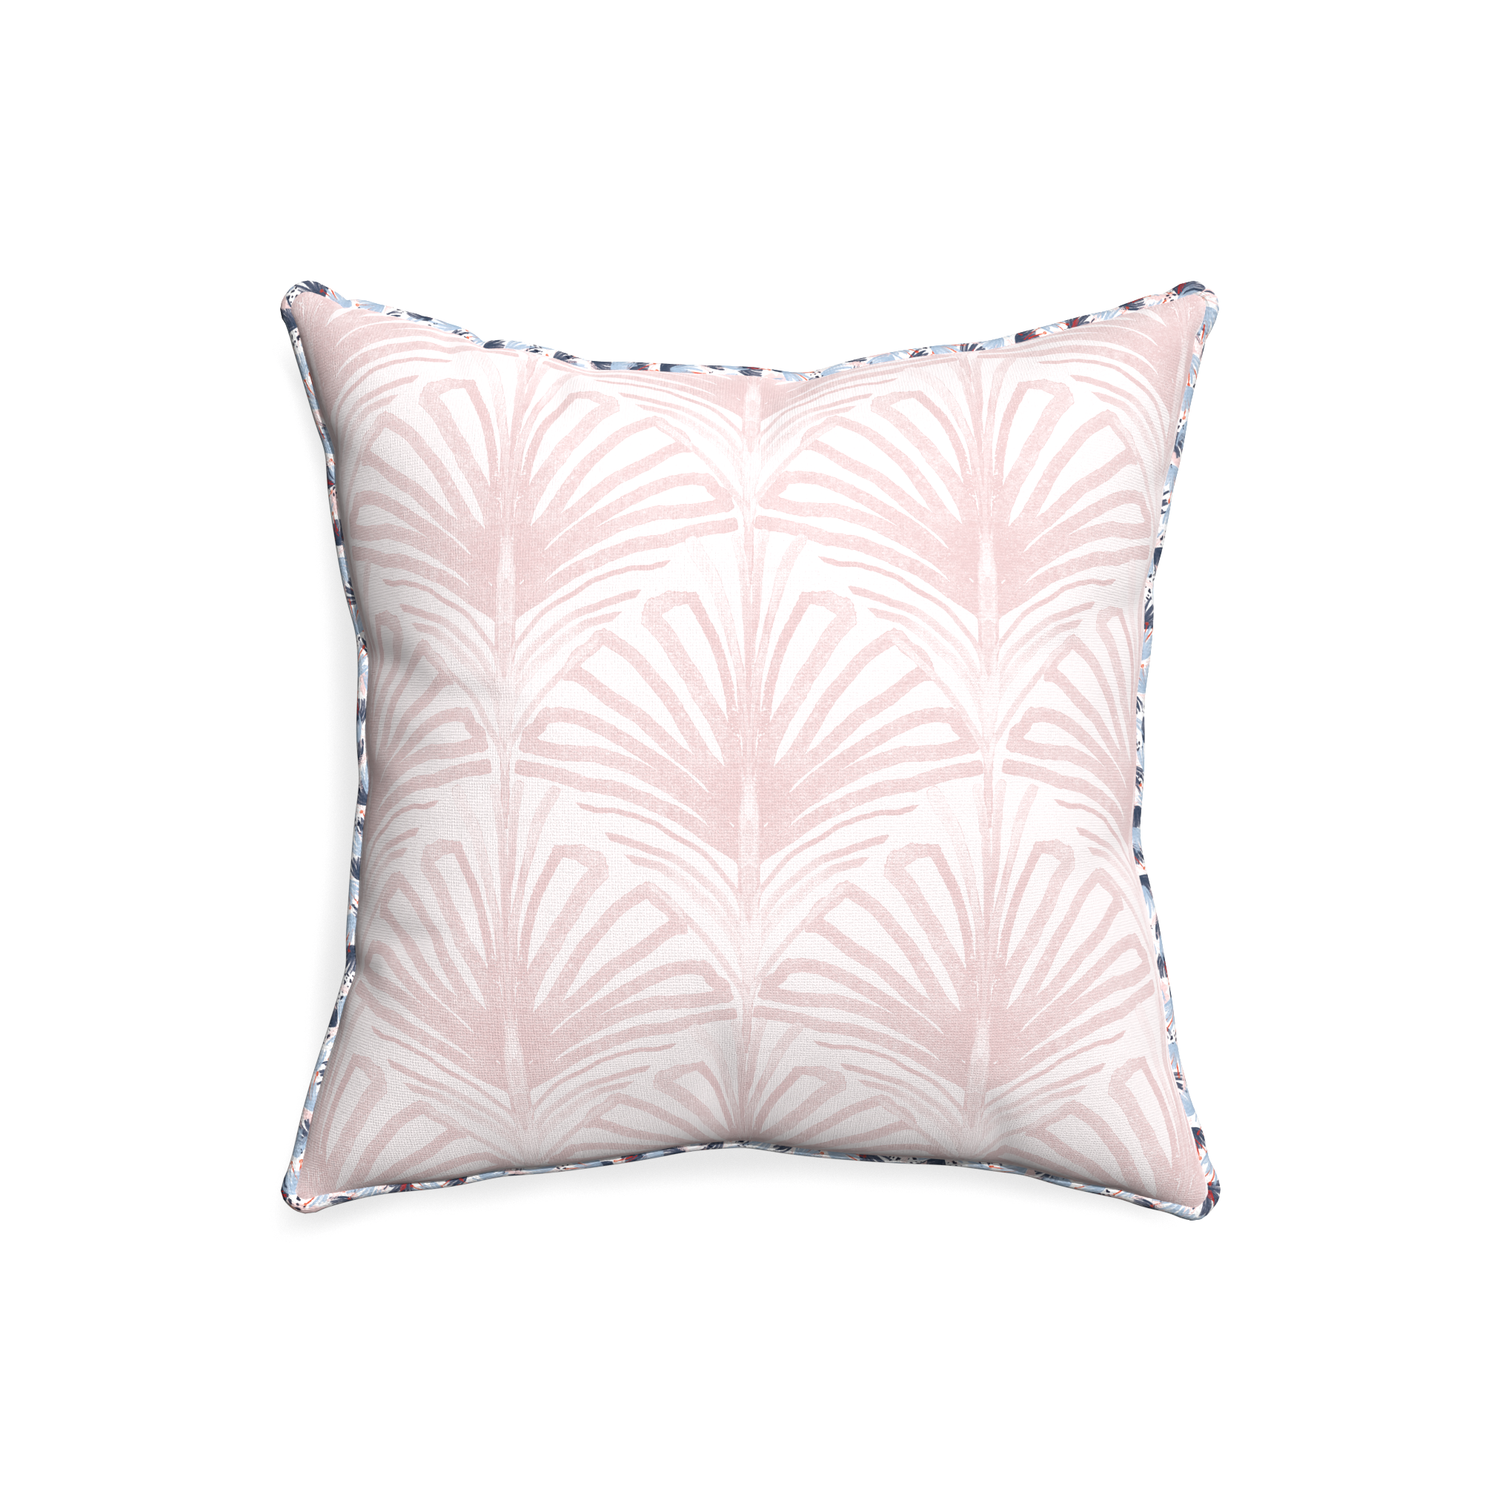 20-square suzy rose custom pillow with e piping on white background